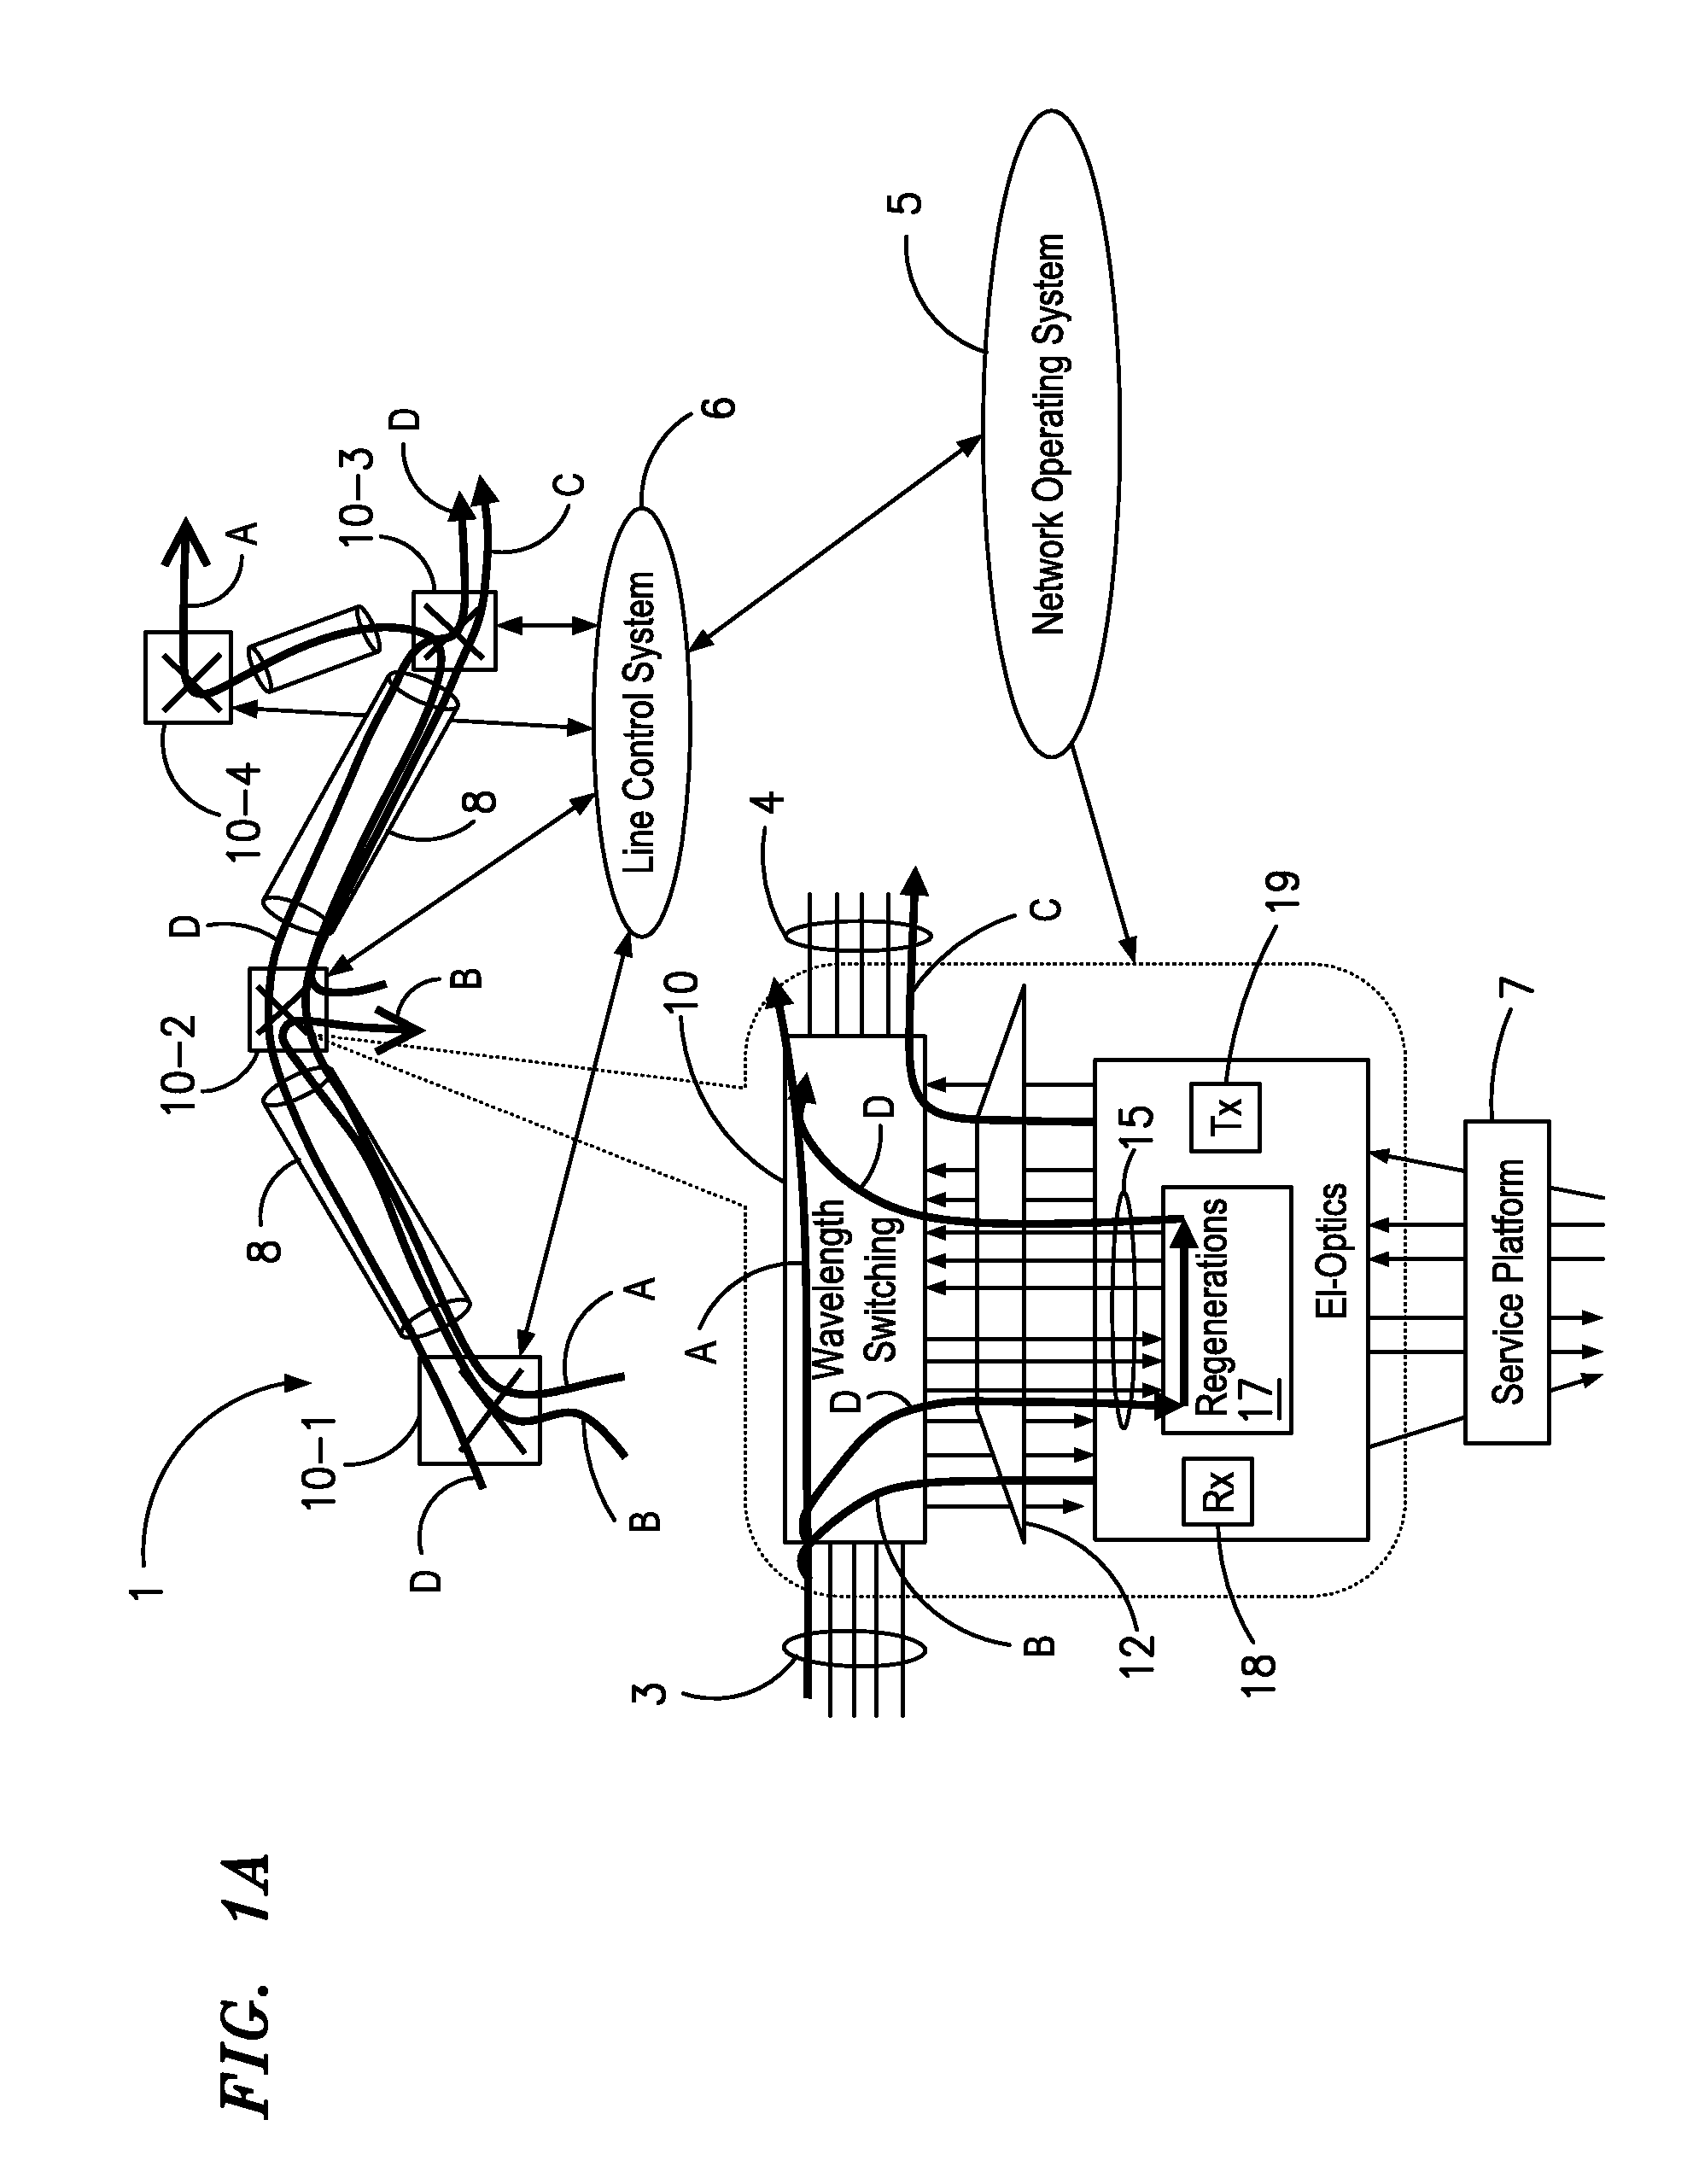 Method For Engineering Connections In A Dynamically Reconfigurable Photonic Switched Network